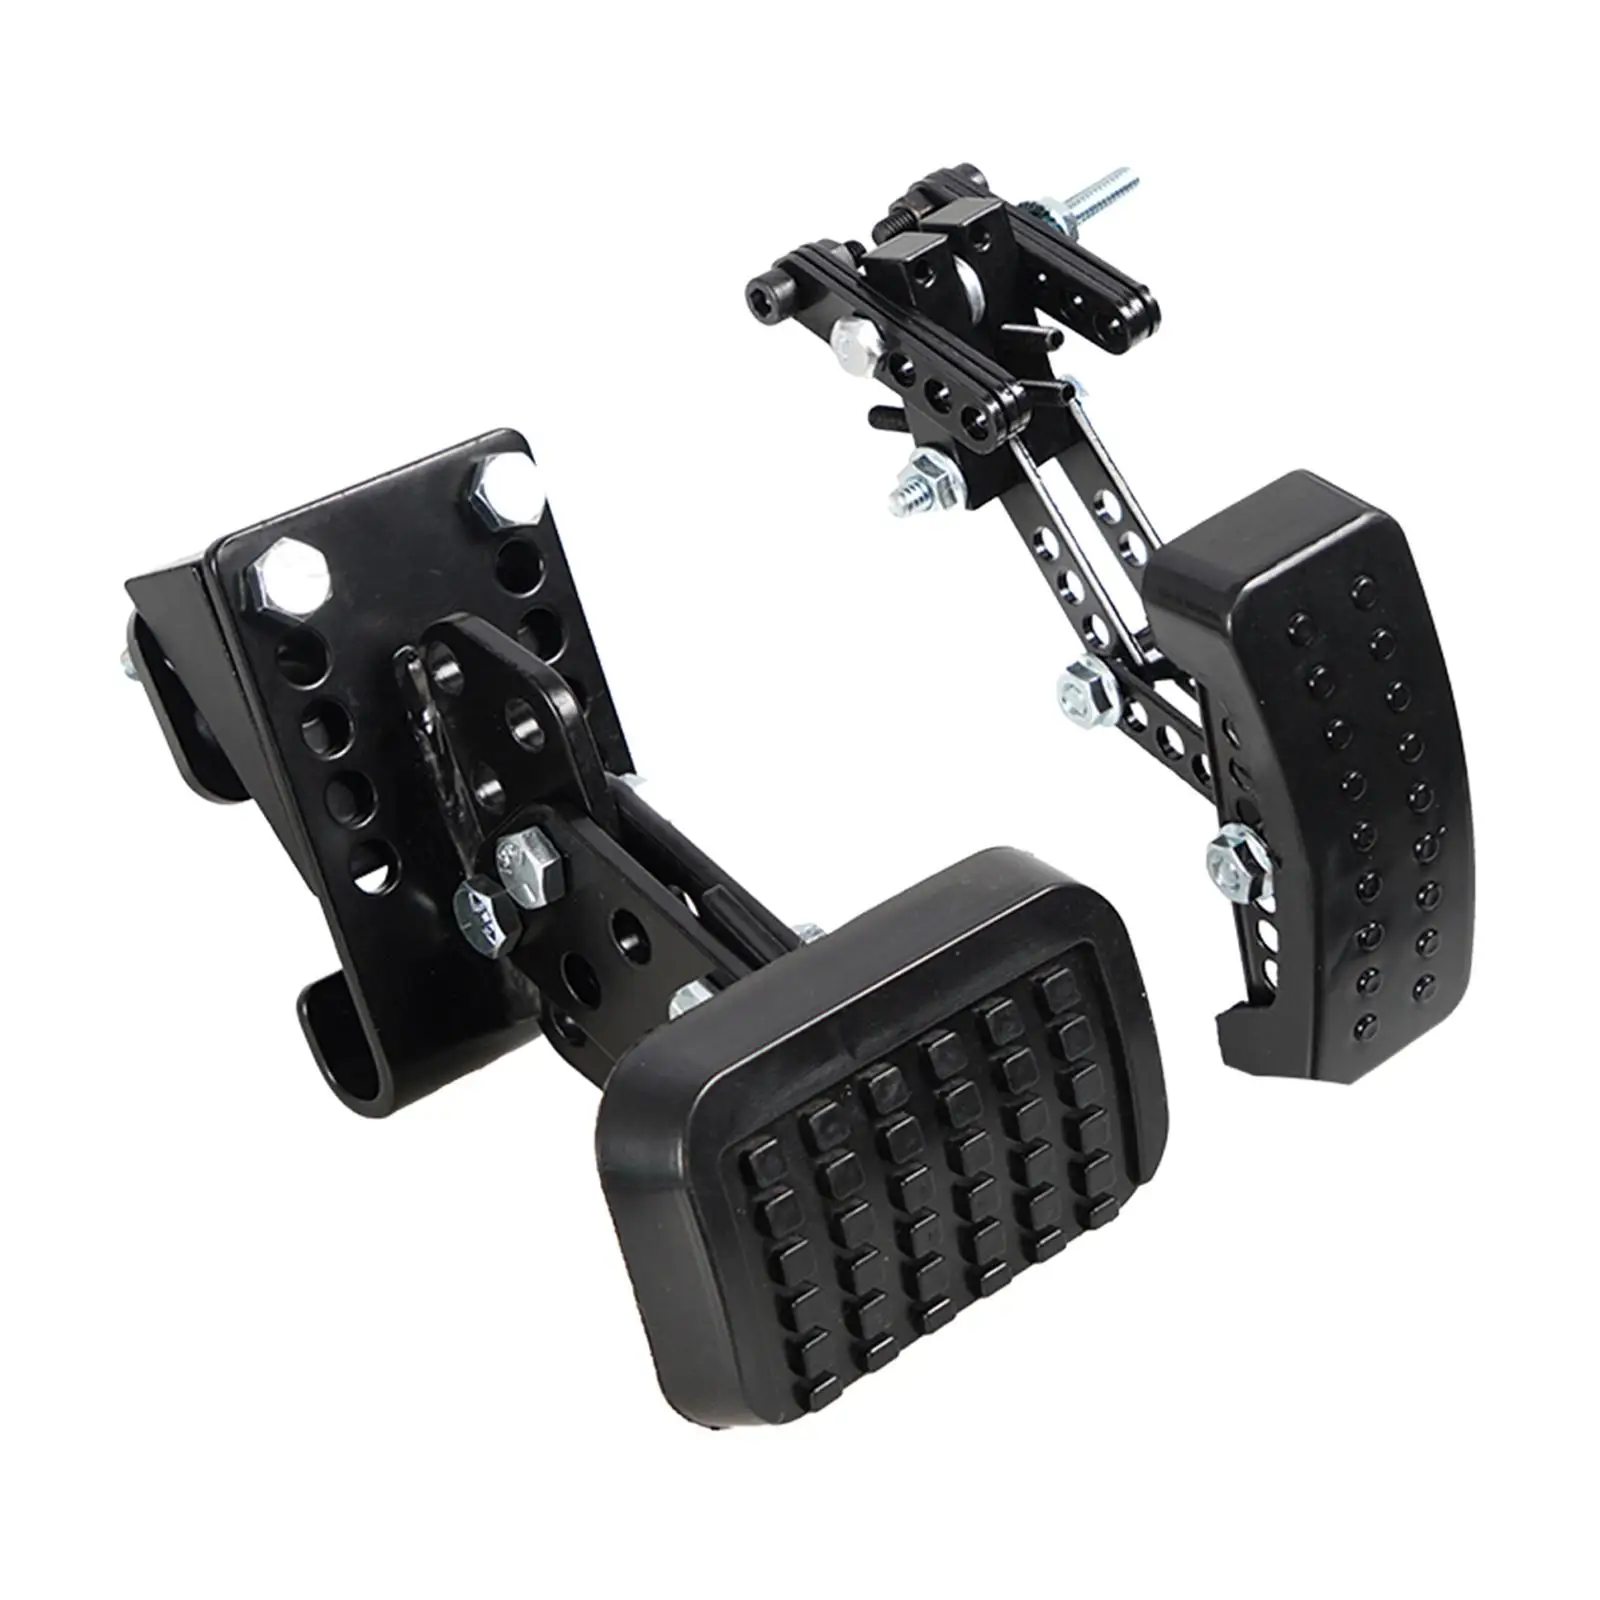 Brake and Pedals Extender Pedal Extension Enlarge Pedal Assembly for Short Drivers Replaces Accessories Parts